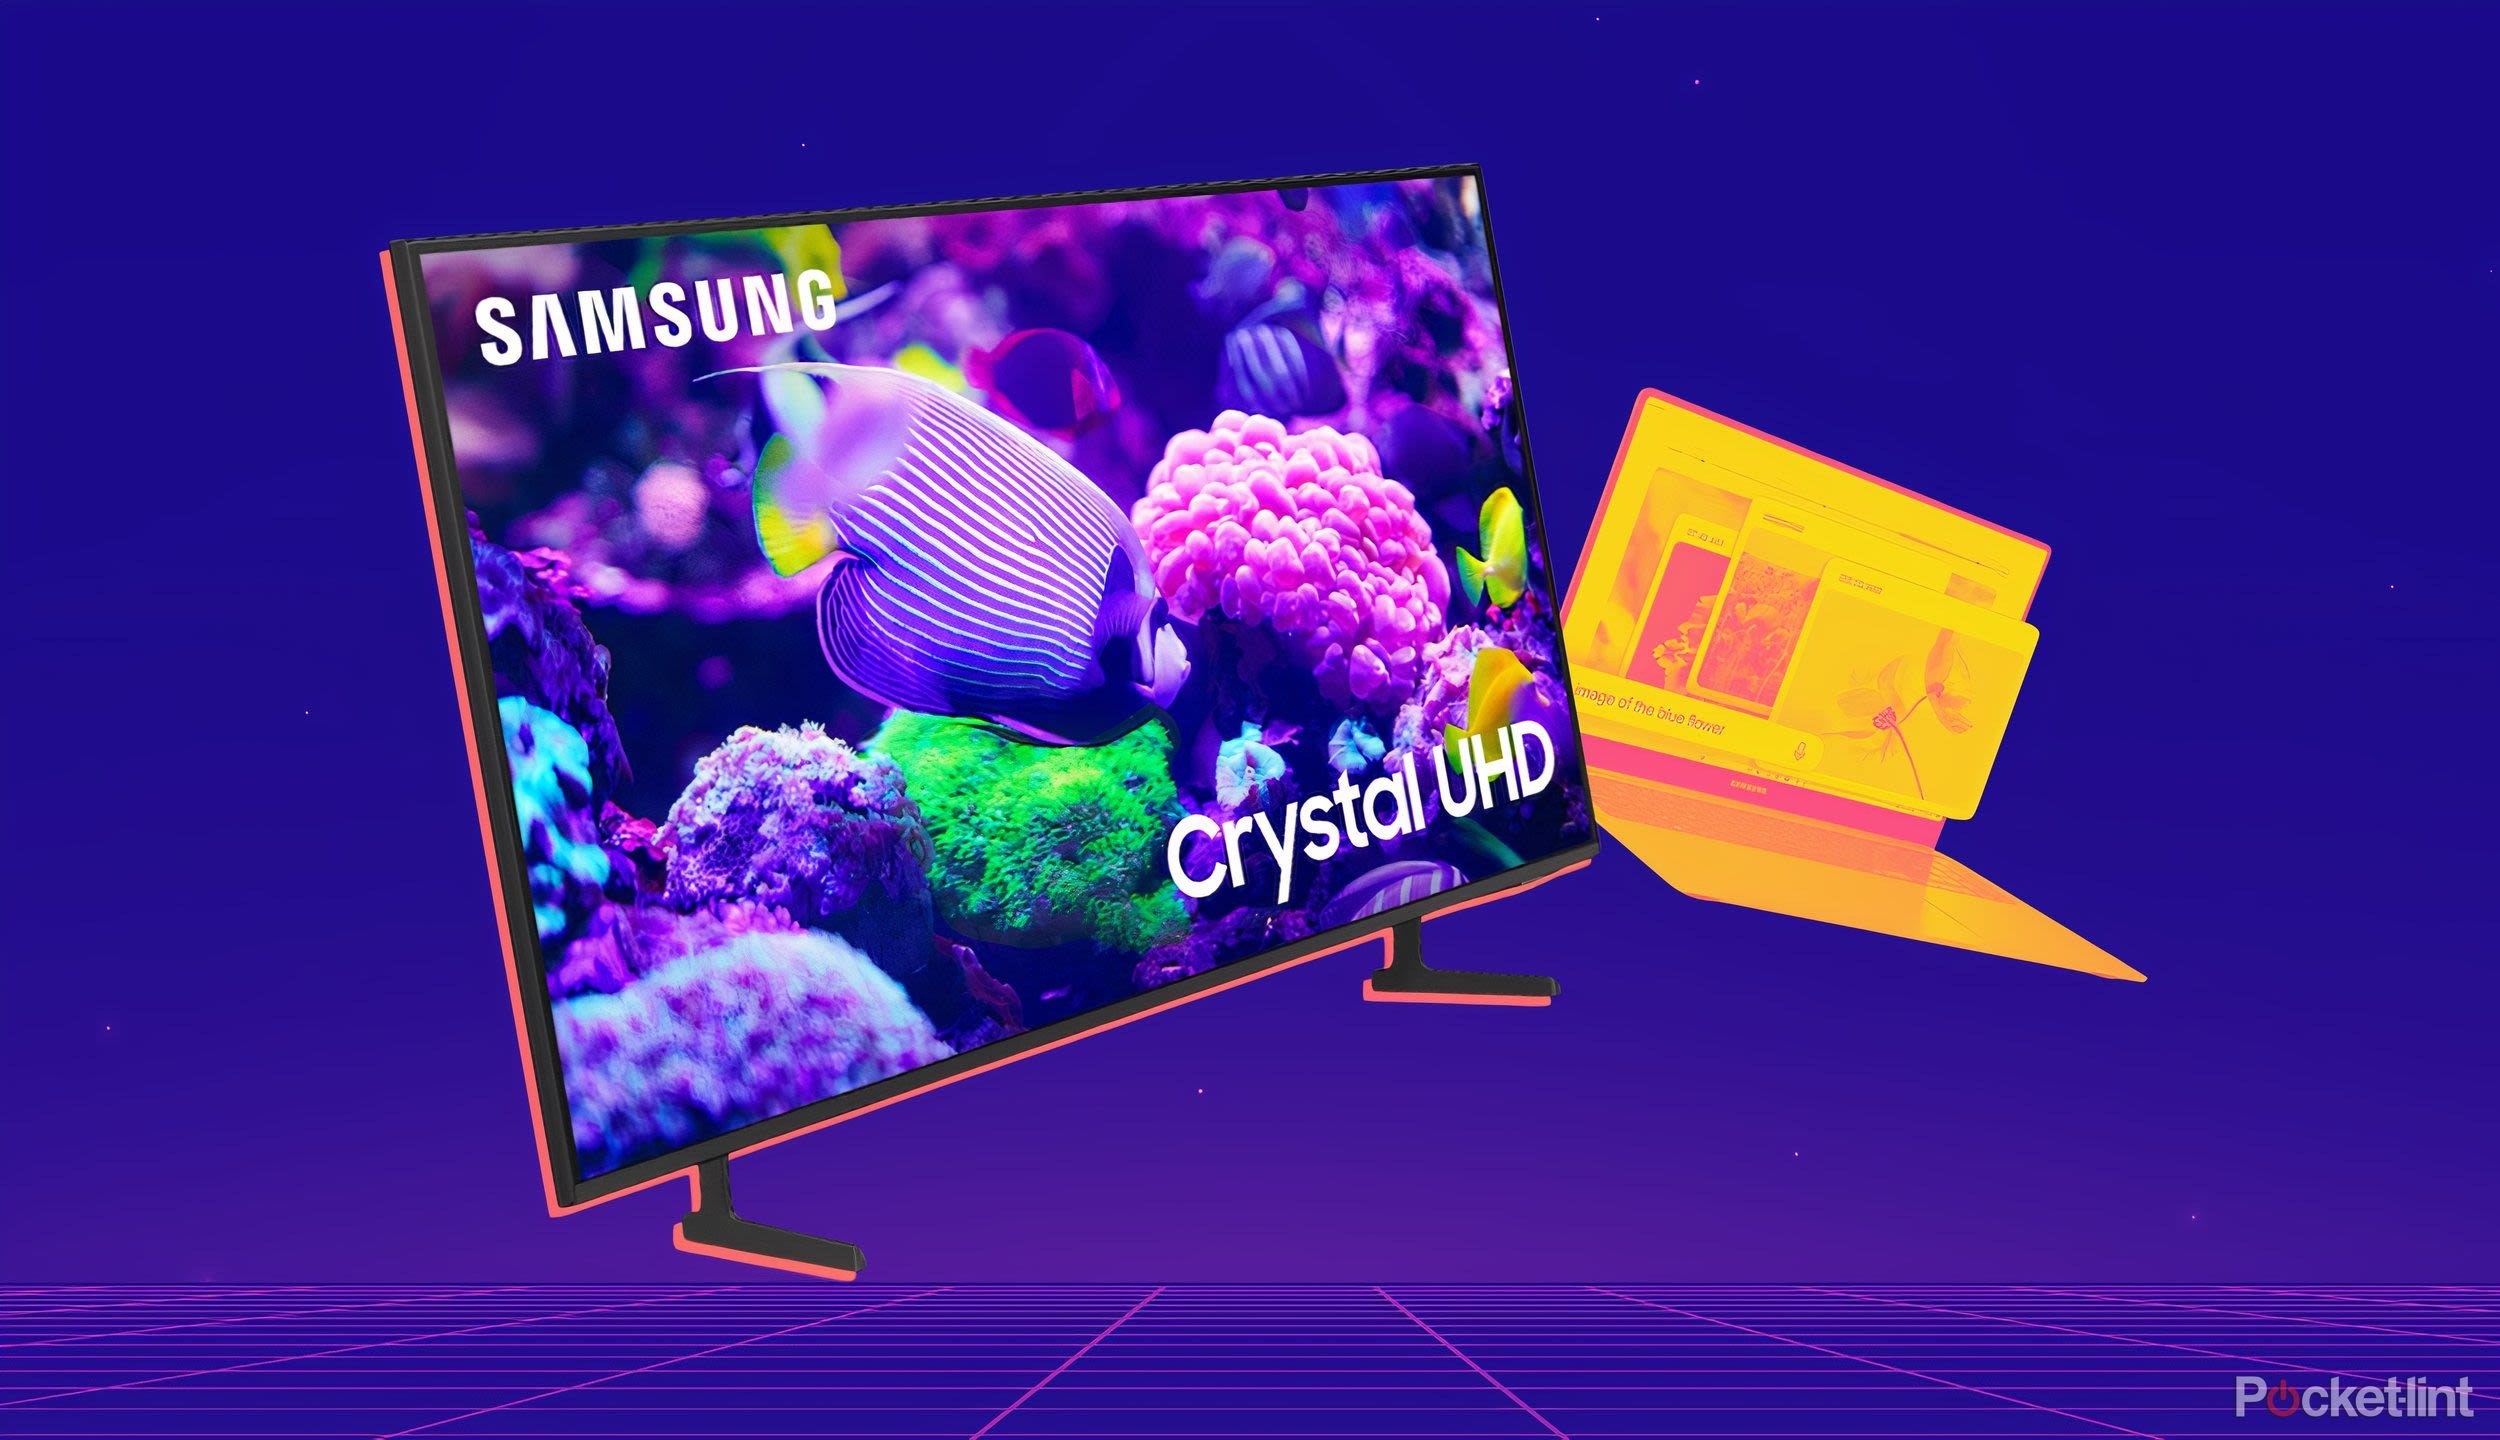 How to get a free 50-inch 4K TV with Samsung's new Copilot+ laptop